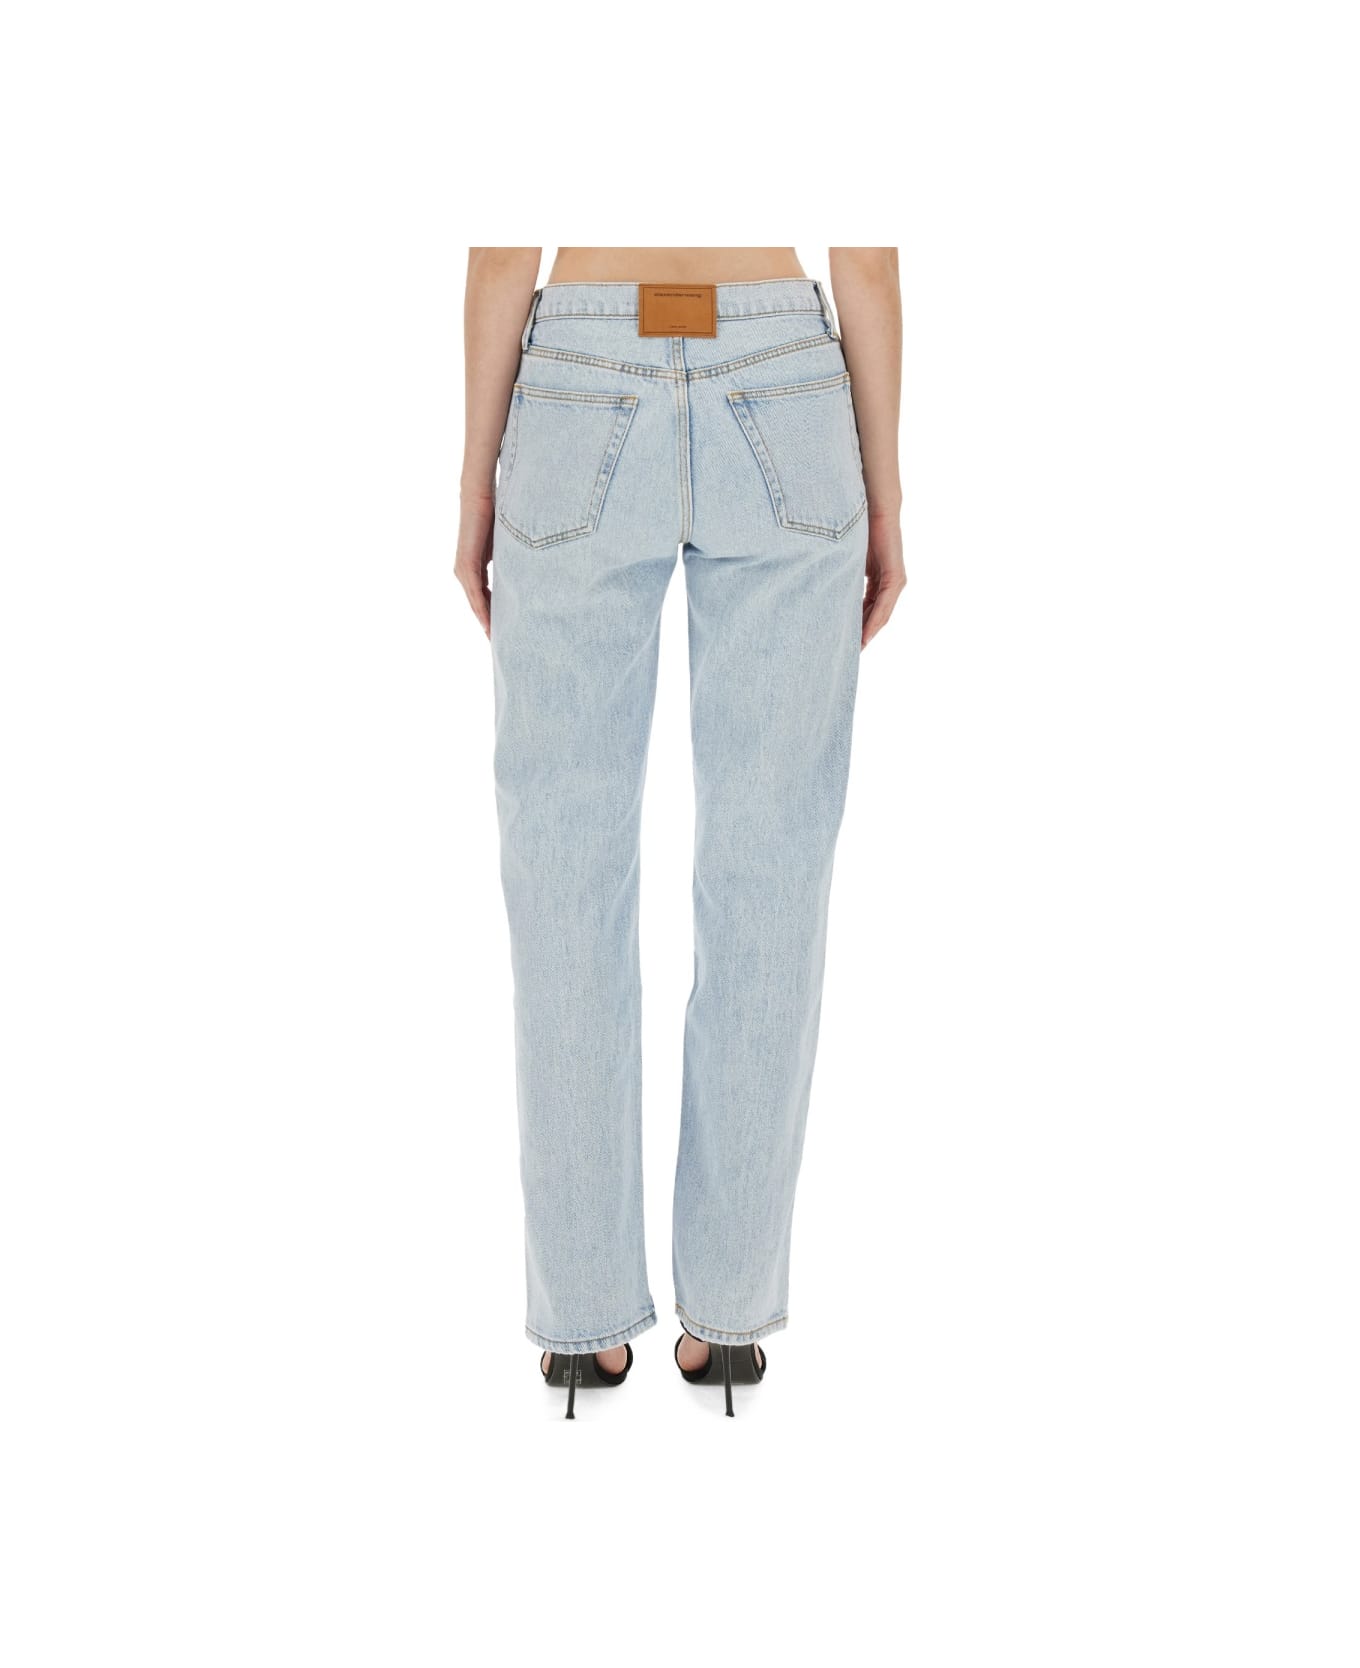 T by Alexander Wang Ez Logo Jeans And Cut-out - DENIM